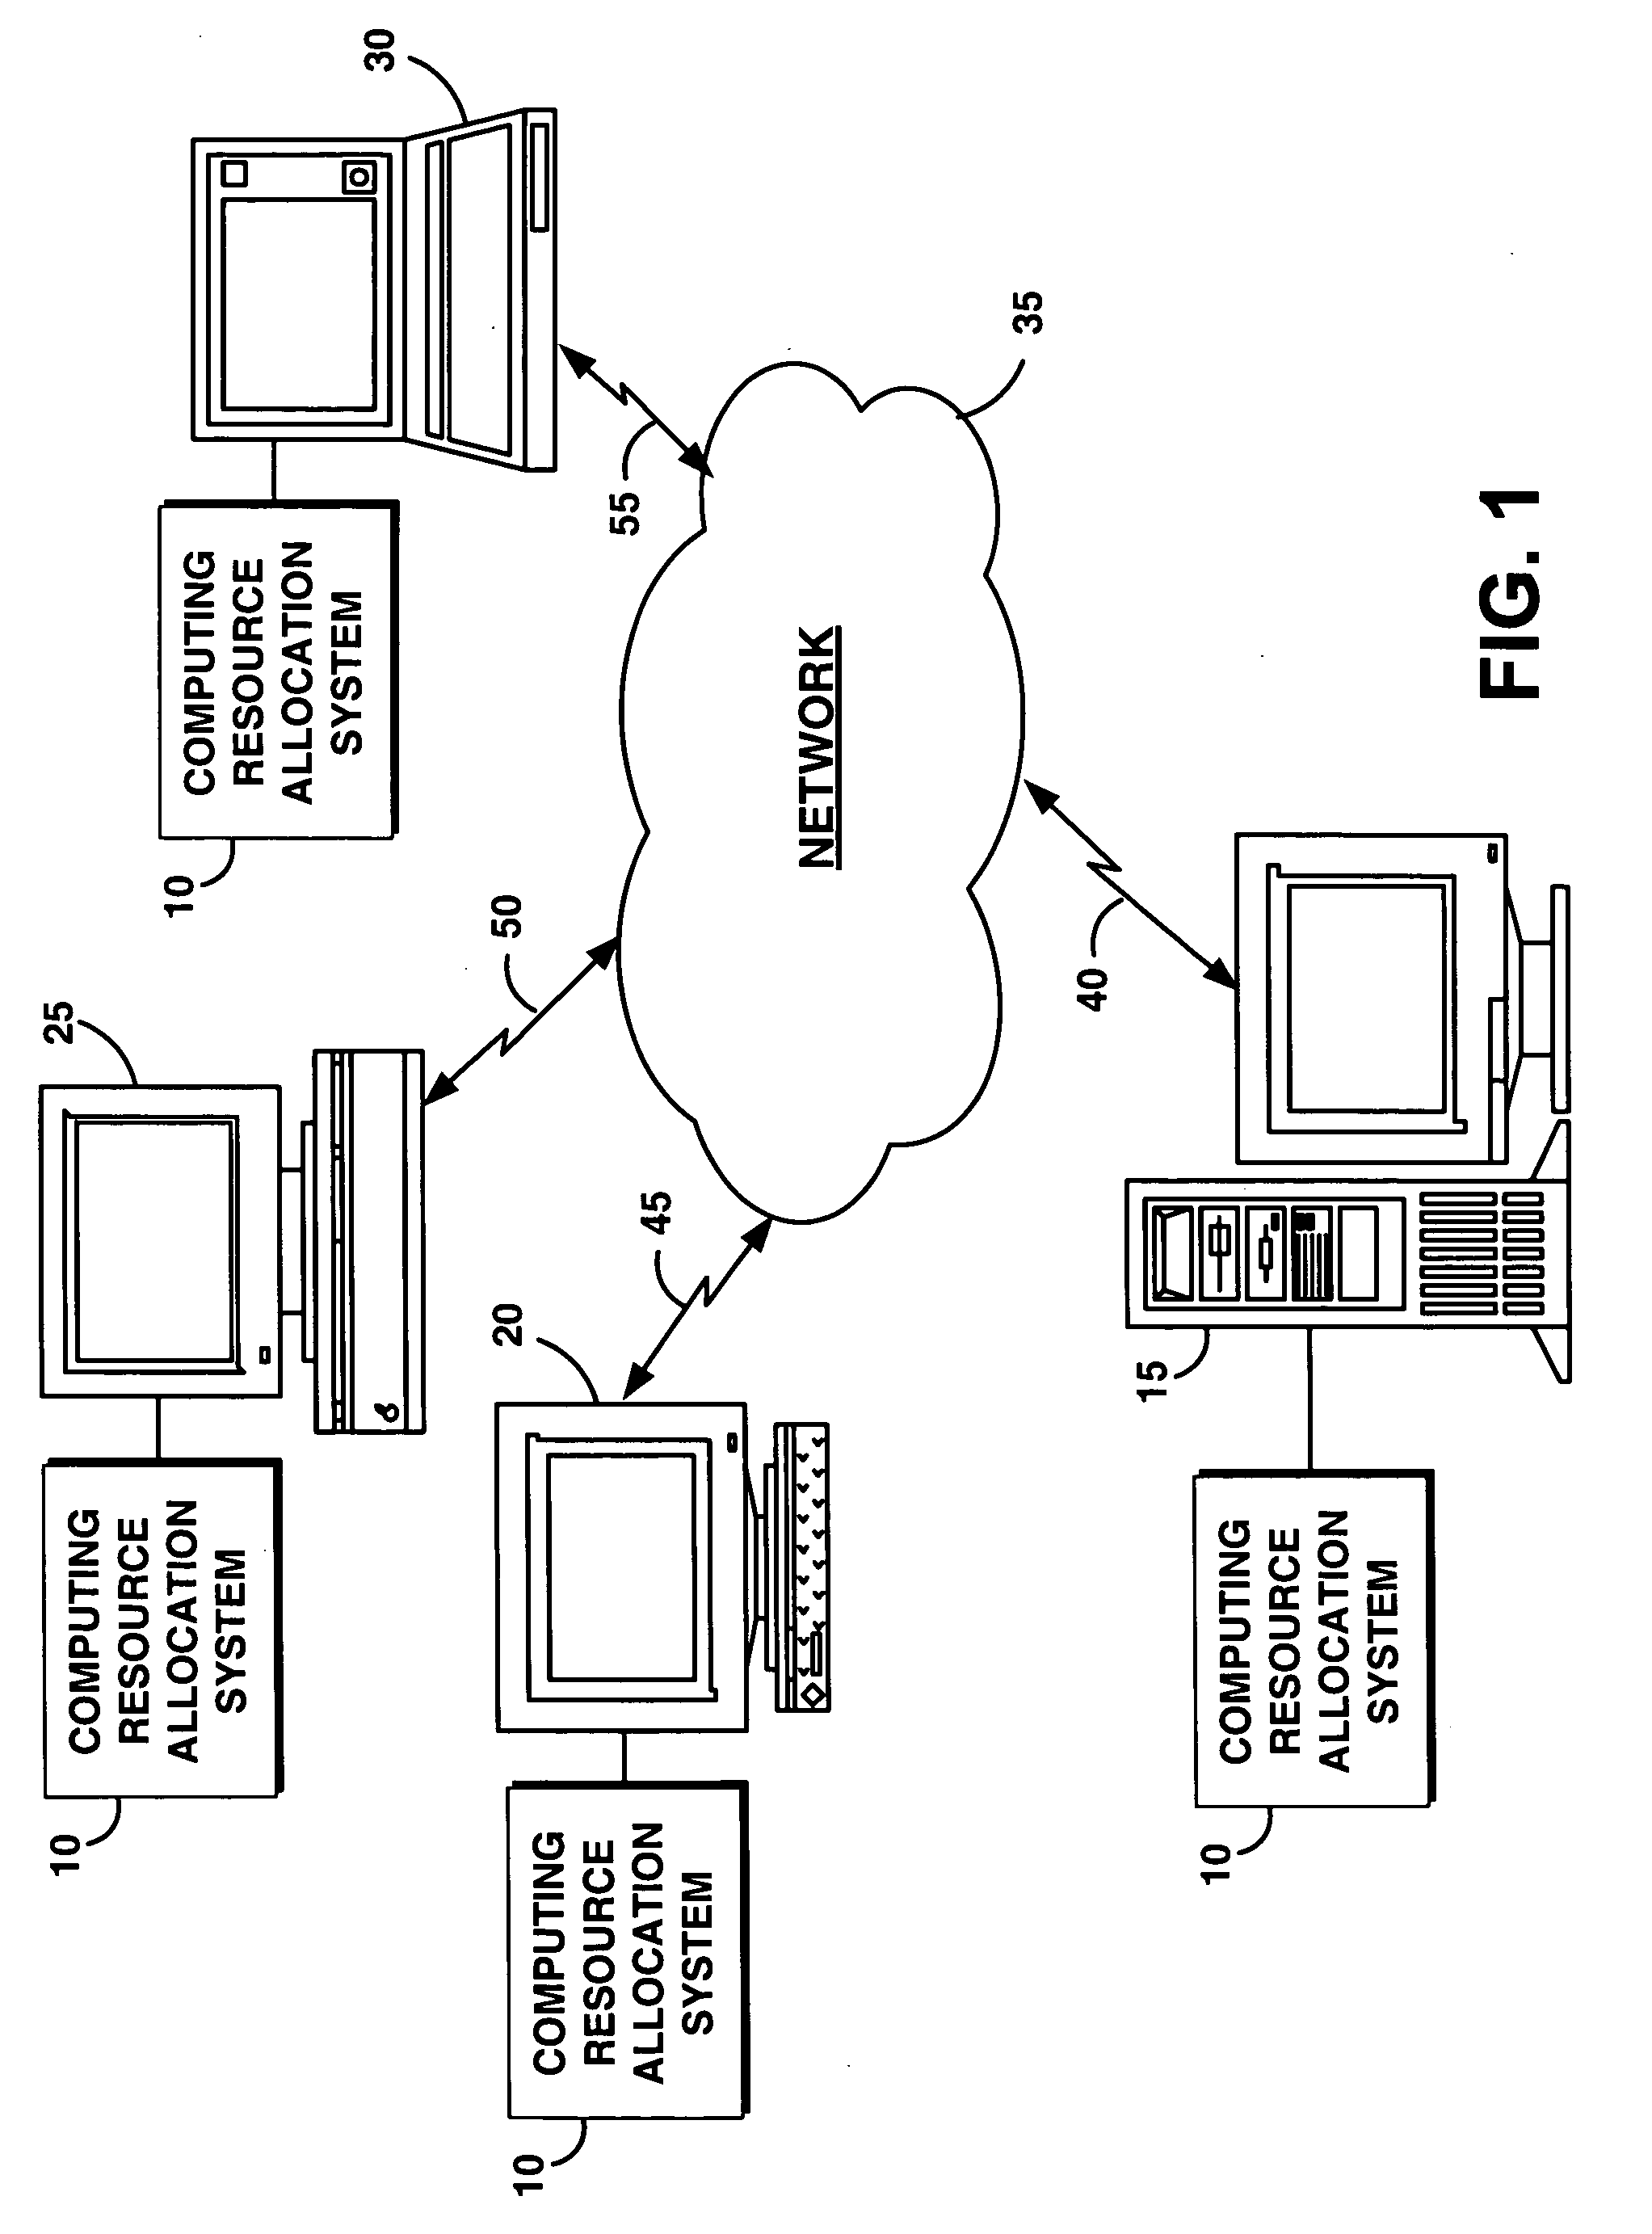 System, method, and service for efficient allocation of computing resources among users